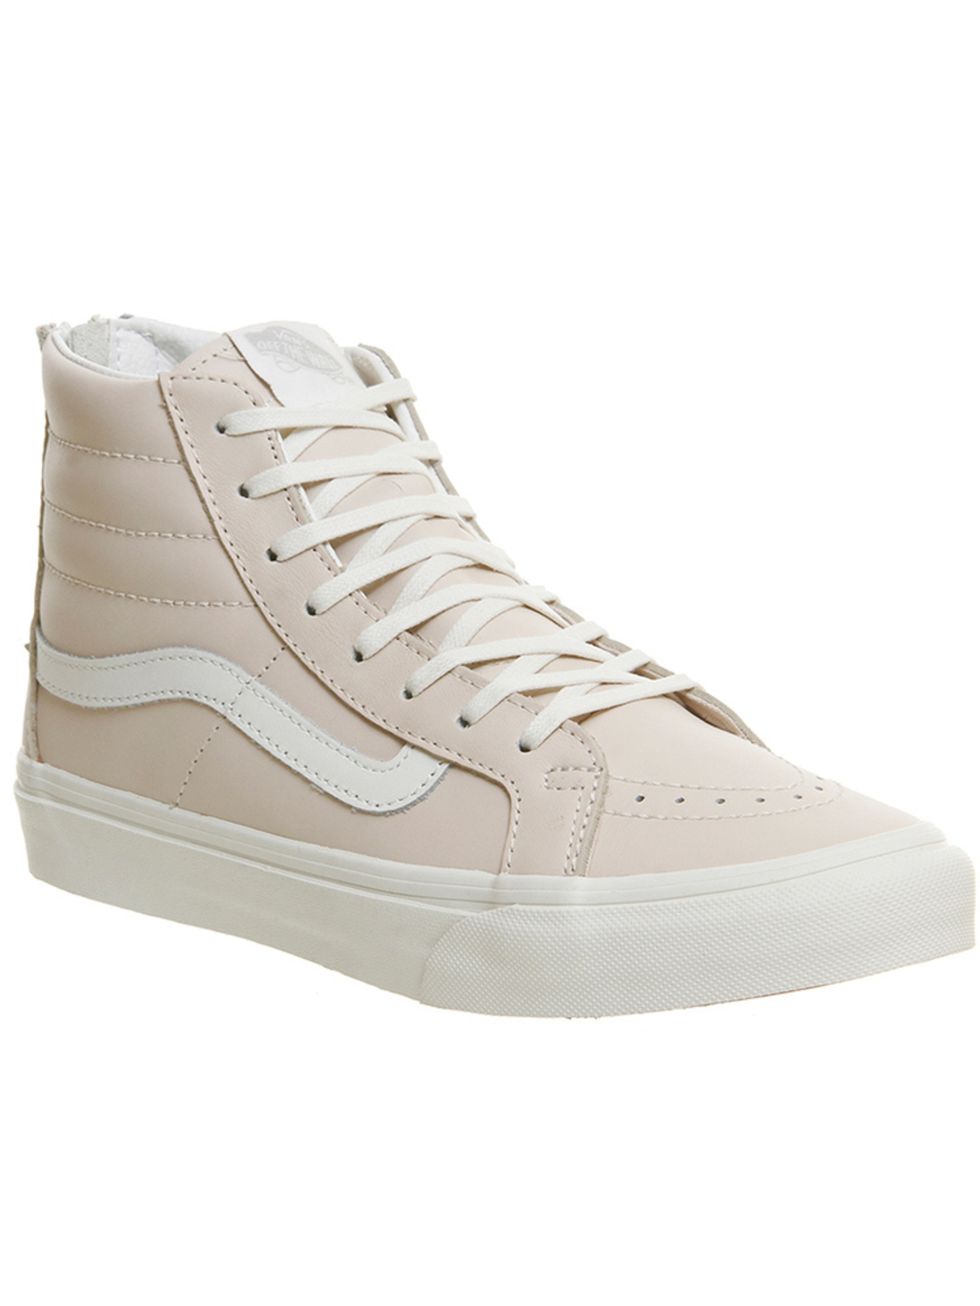 <p>Sneakers, £79.99, Vans at <a href="http://www.office.co.uk/view/product/office_catalog/5,20/1791776294" target="_blank">Office </a></p>